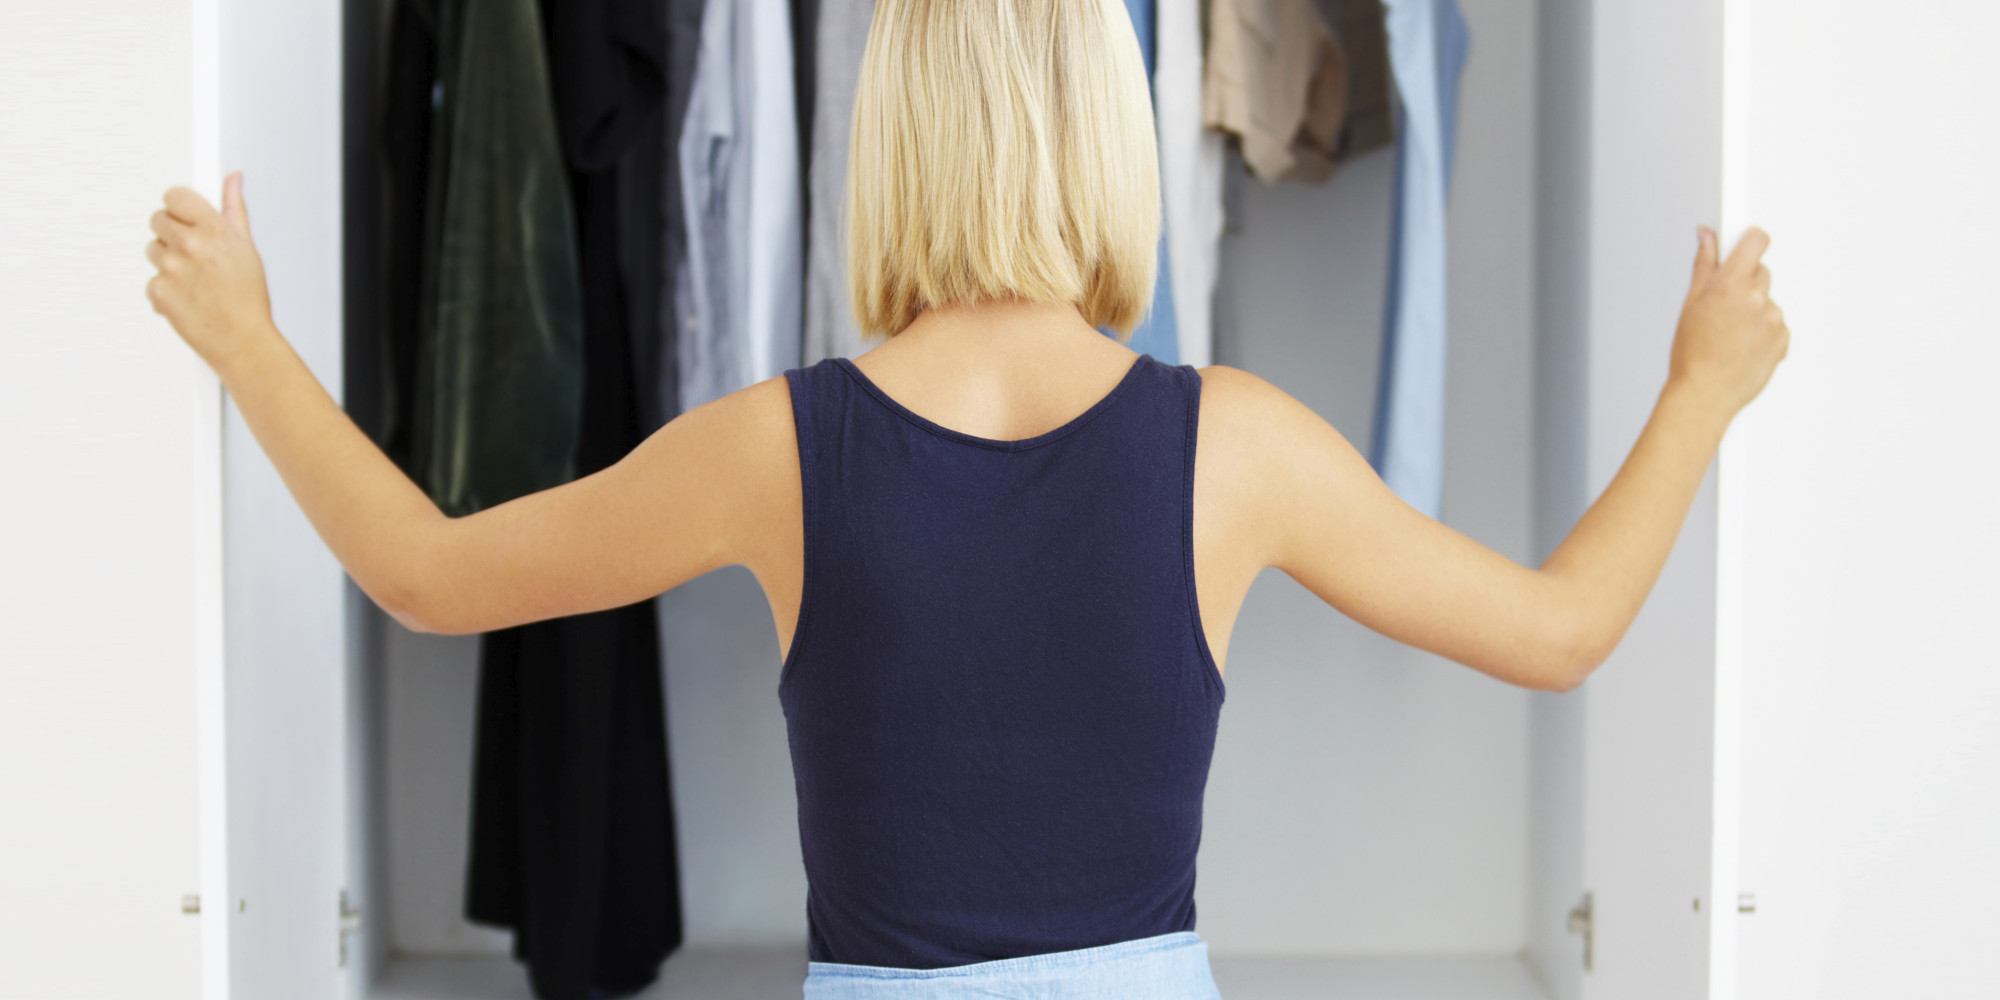 How to Curate a Conscious Closet | HuffPost